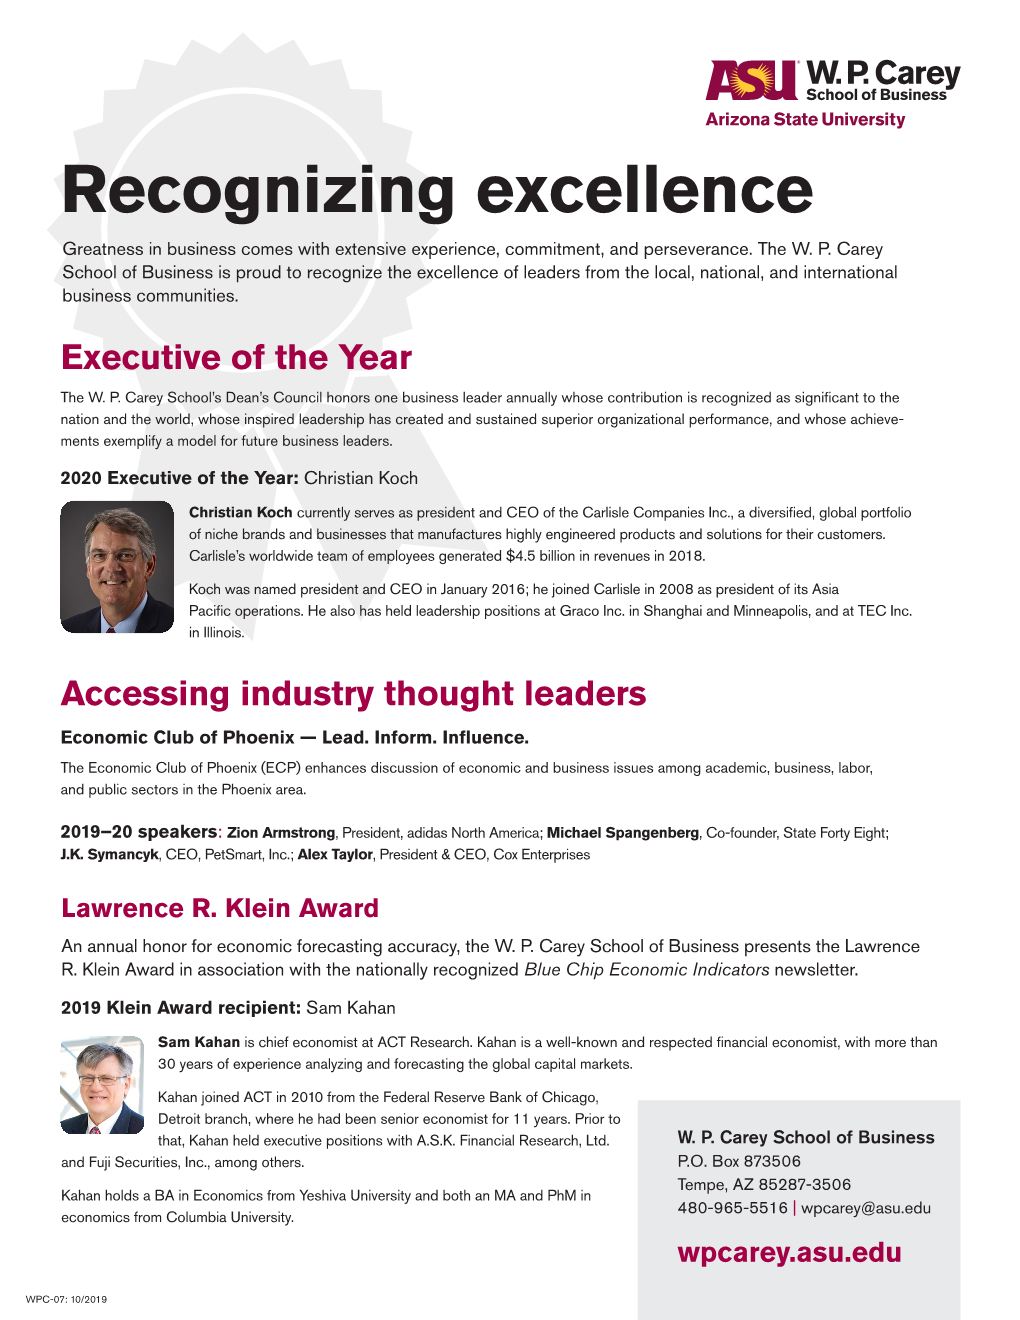 Recognizing Excellence Greatness in Business Comes with Extensive Experience, Commitment, and Perseverance